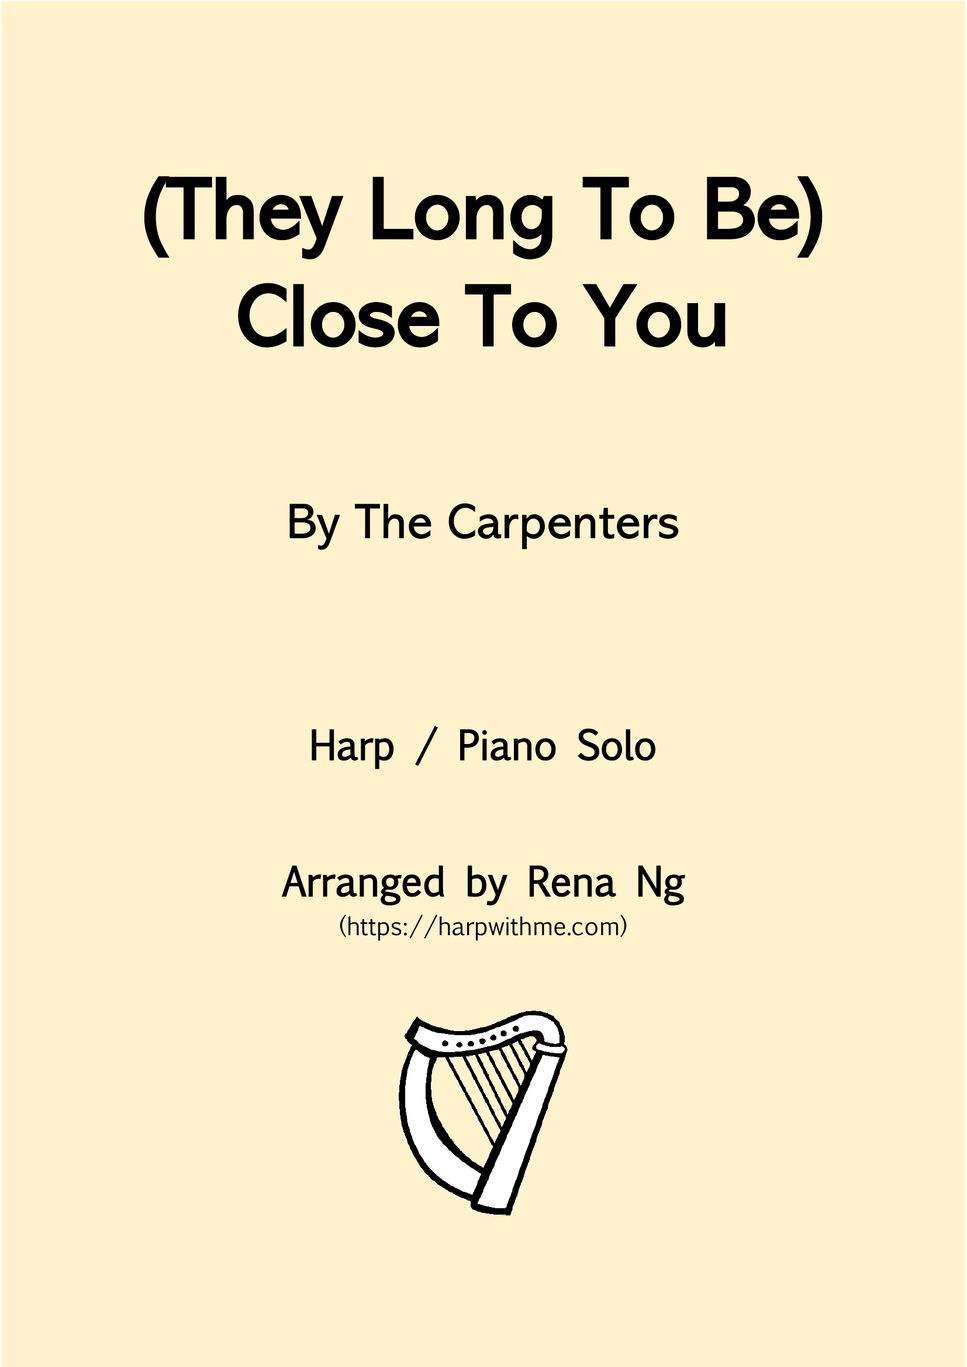 The Carpenters - Close To You (Harp / Piano Solo) - Intermediate by Harp With Me